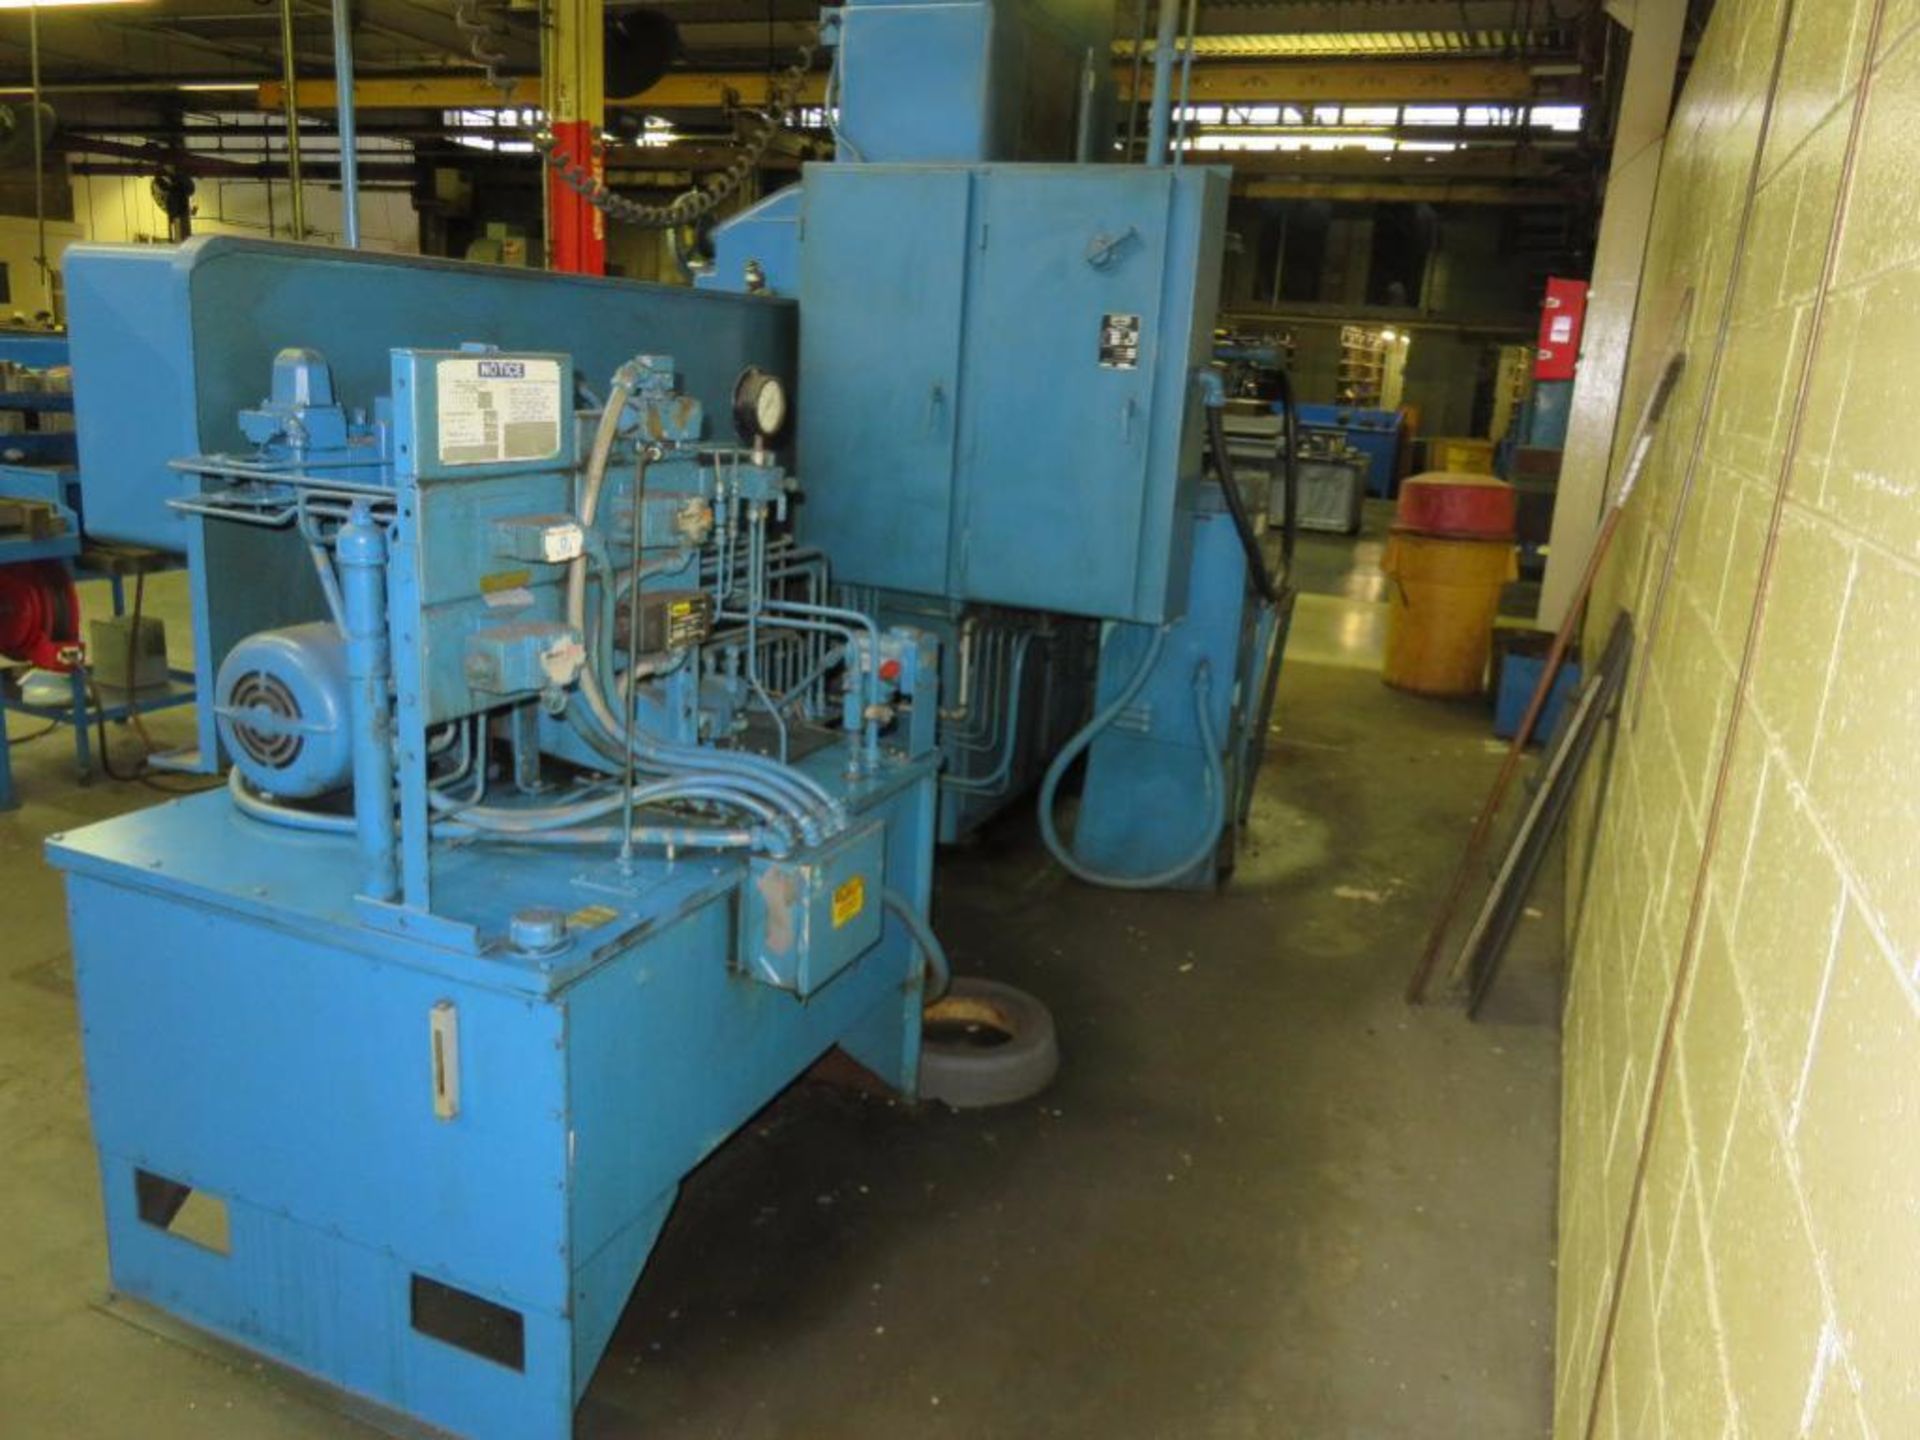 Mattison 24 in. x 72 in. Hydraulic Surface Grinder, S/N 24197 (1981) (Location H) - Image 3 of 4